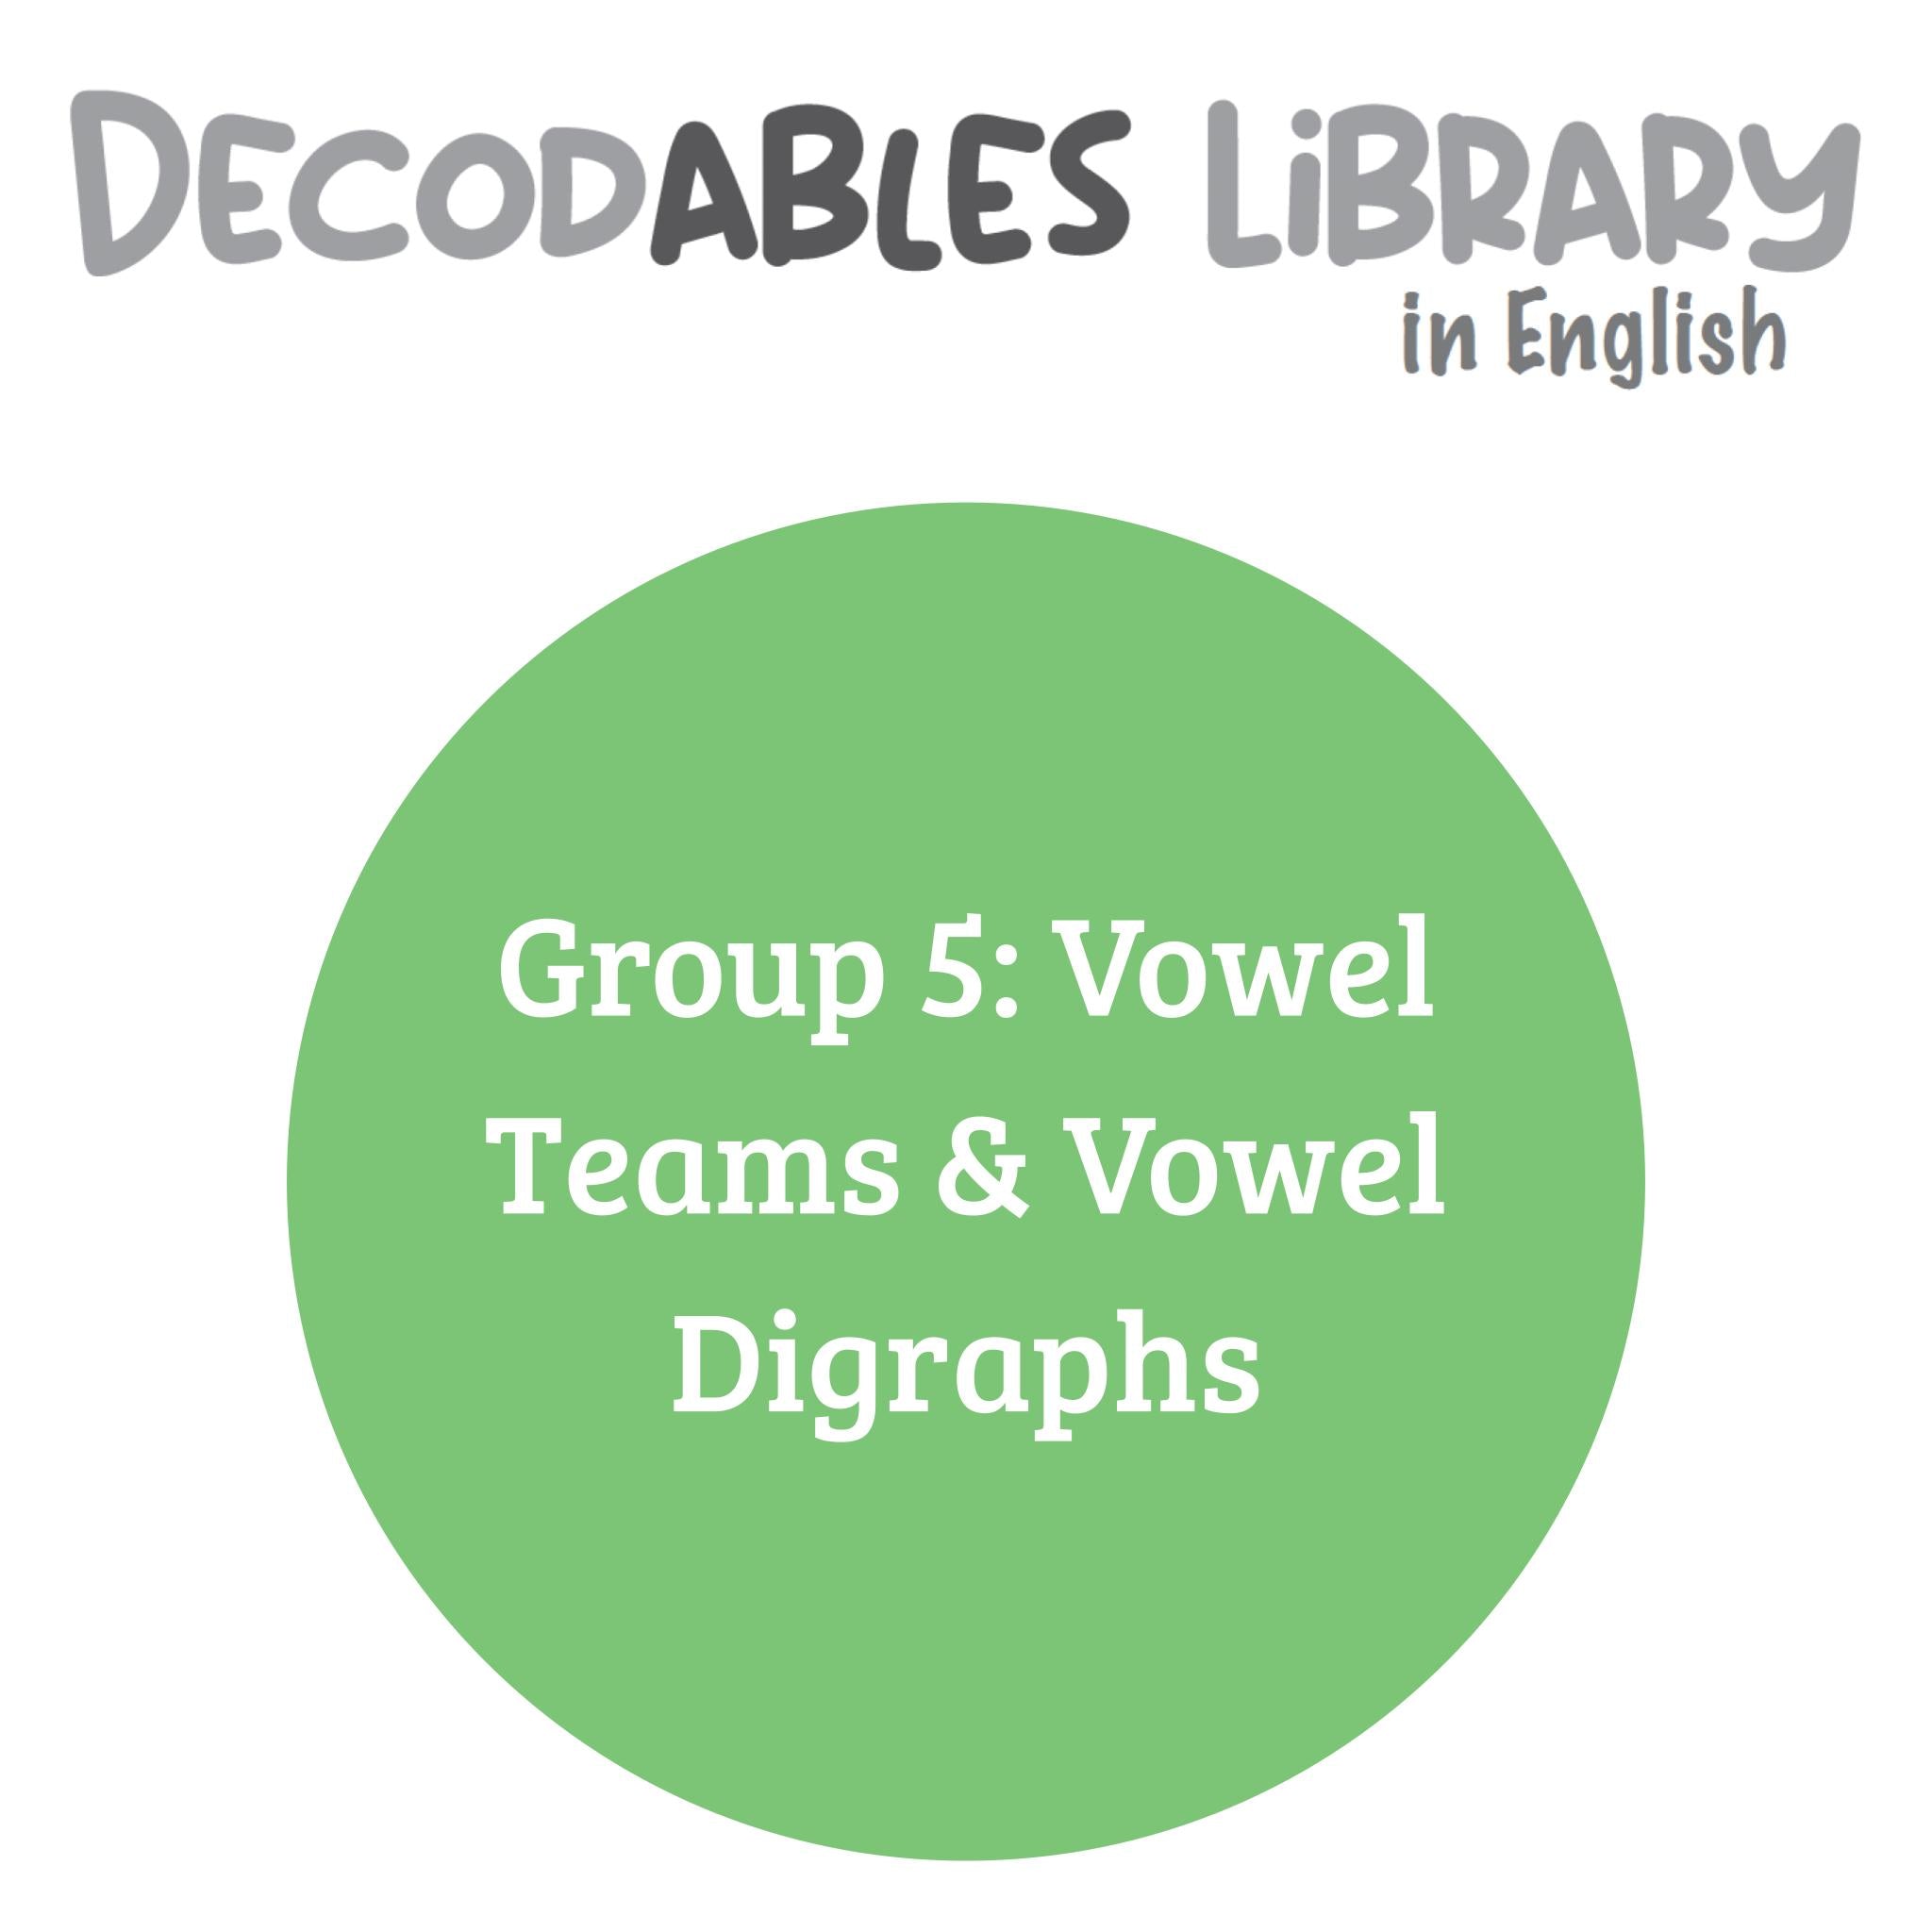 English Decodables Library - Group 5: Vowel Teams & Vowel Digraphs (set of 15 titles)